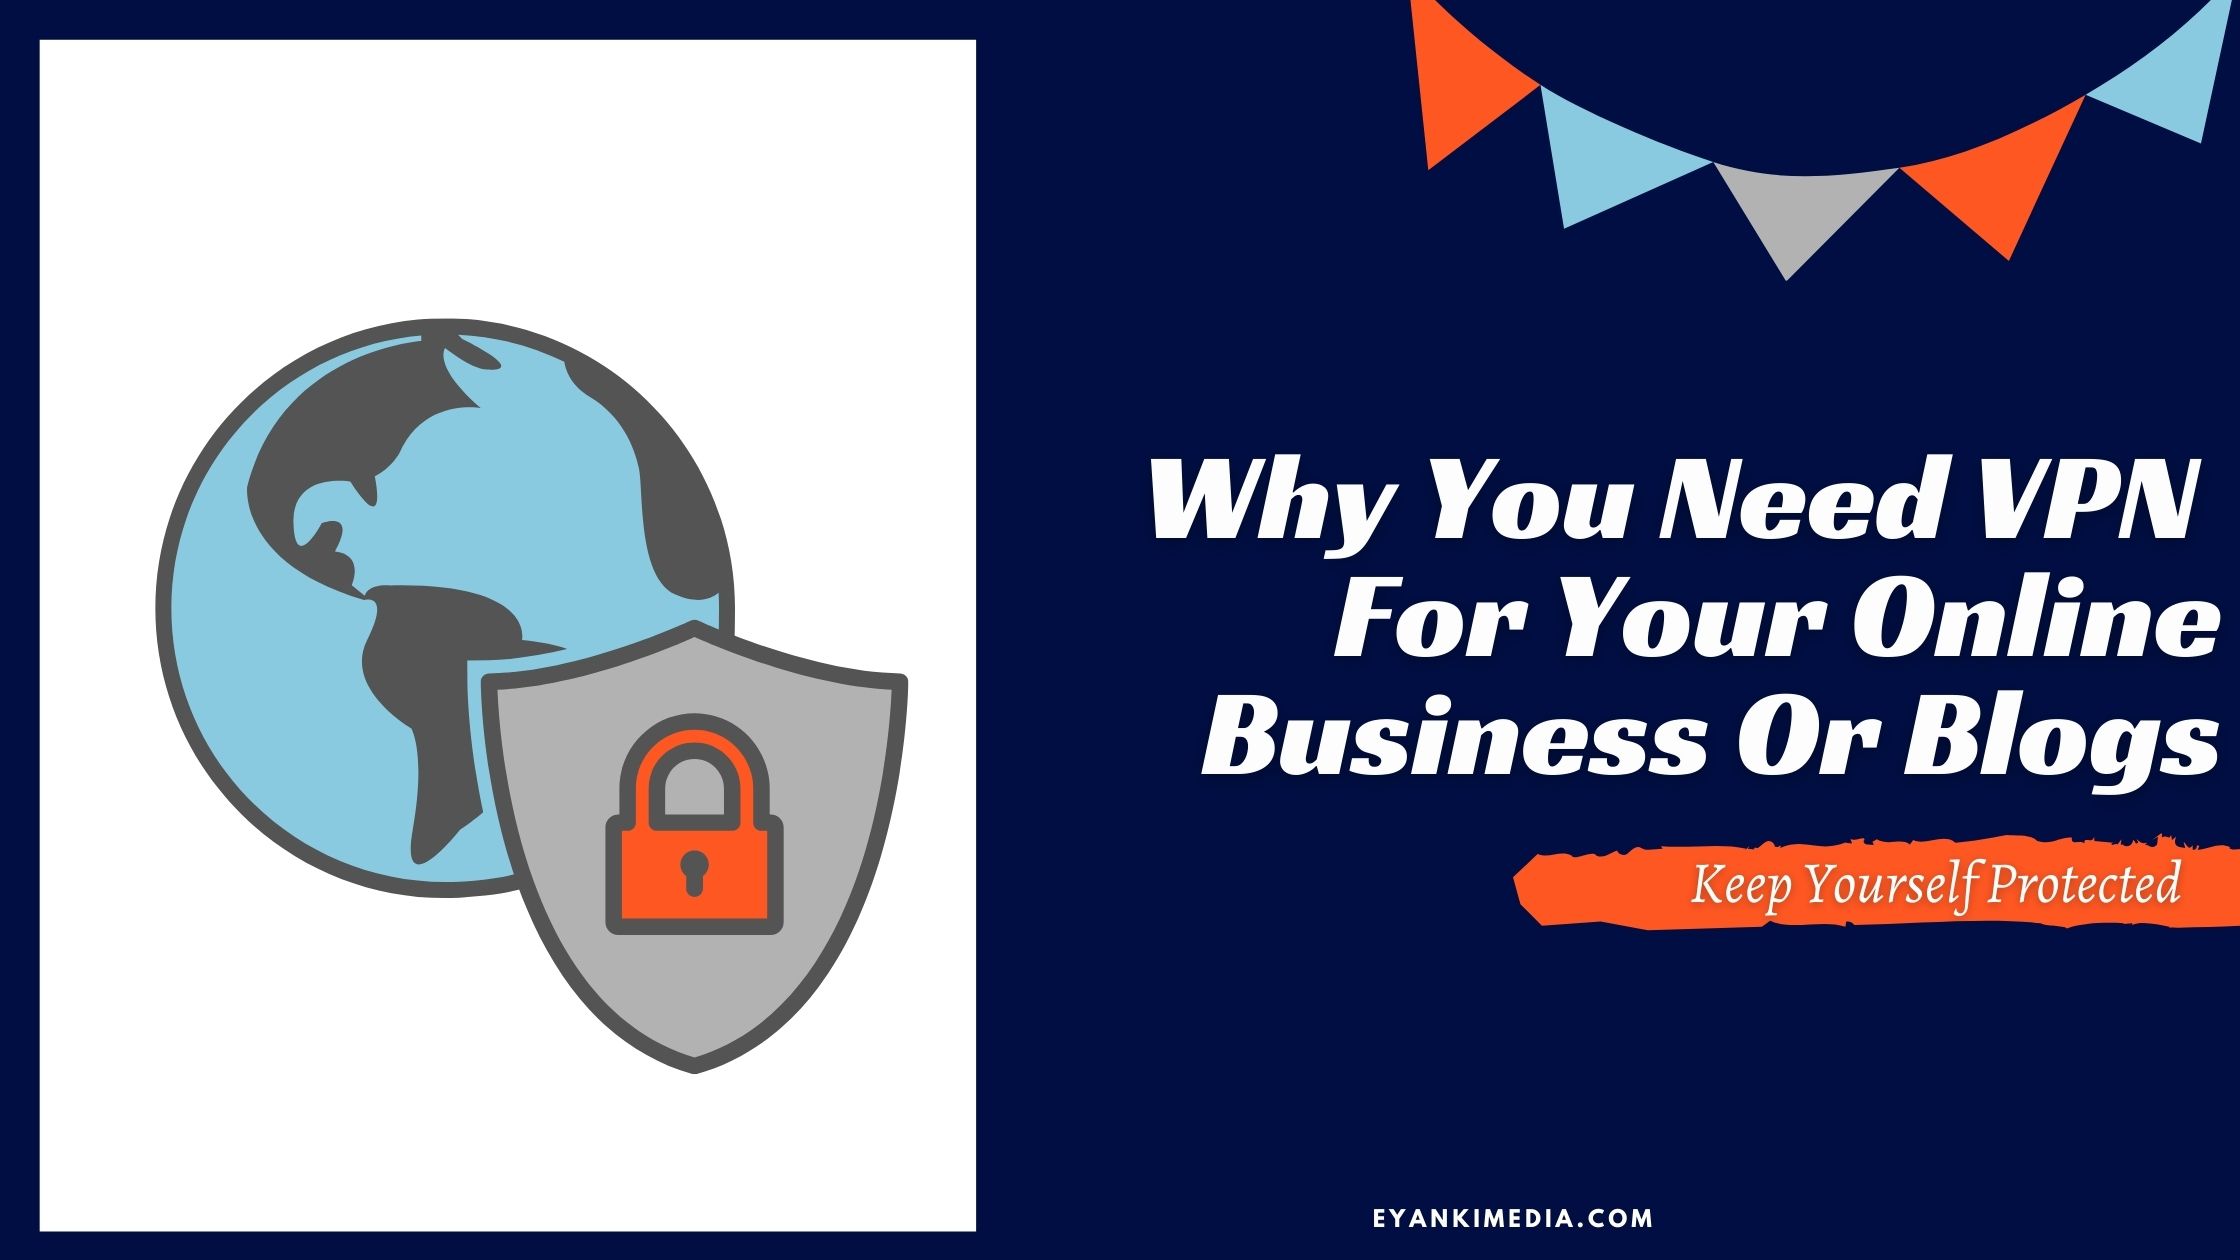 Why VPN Is Important For Online Business